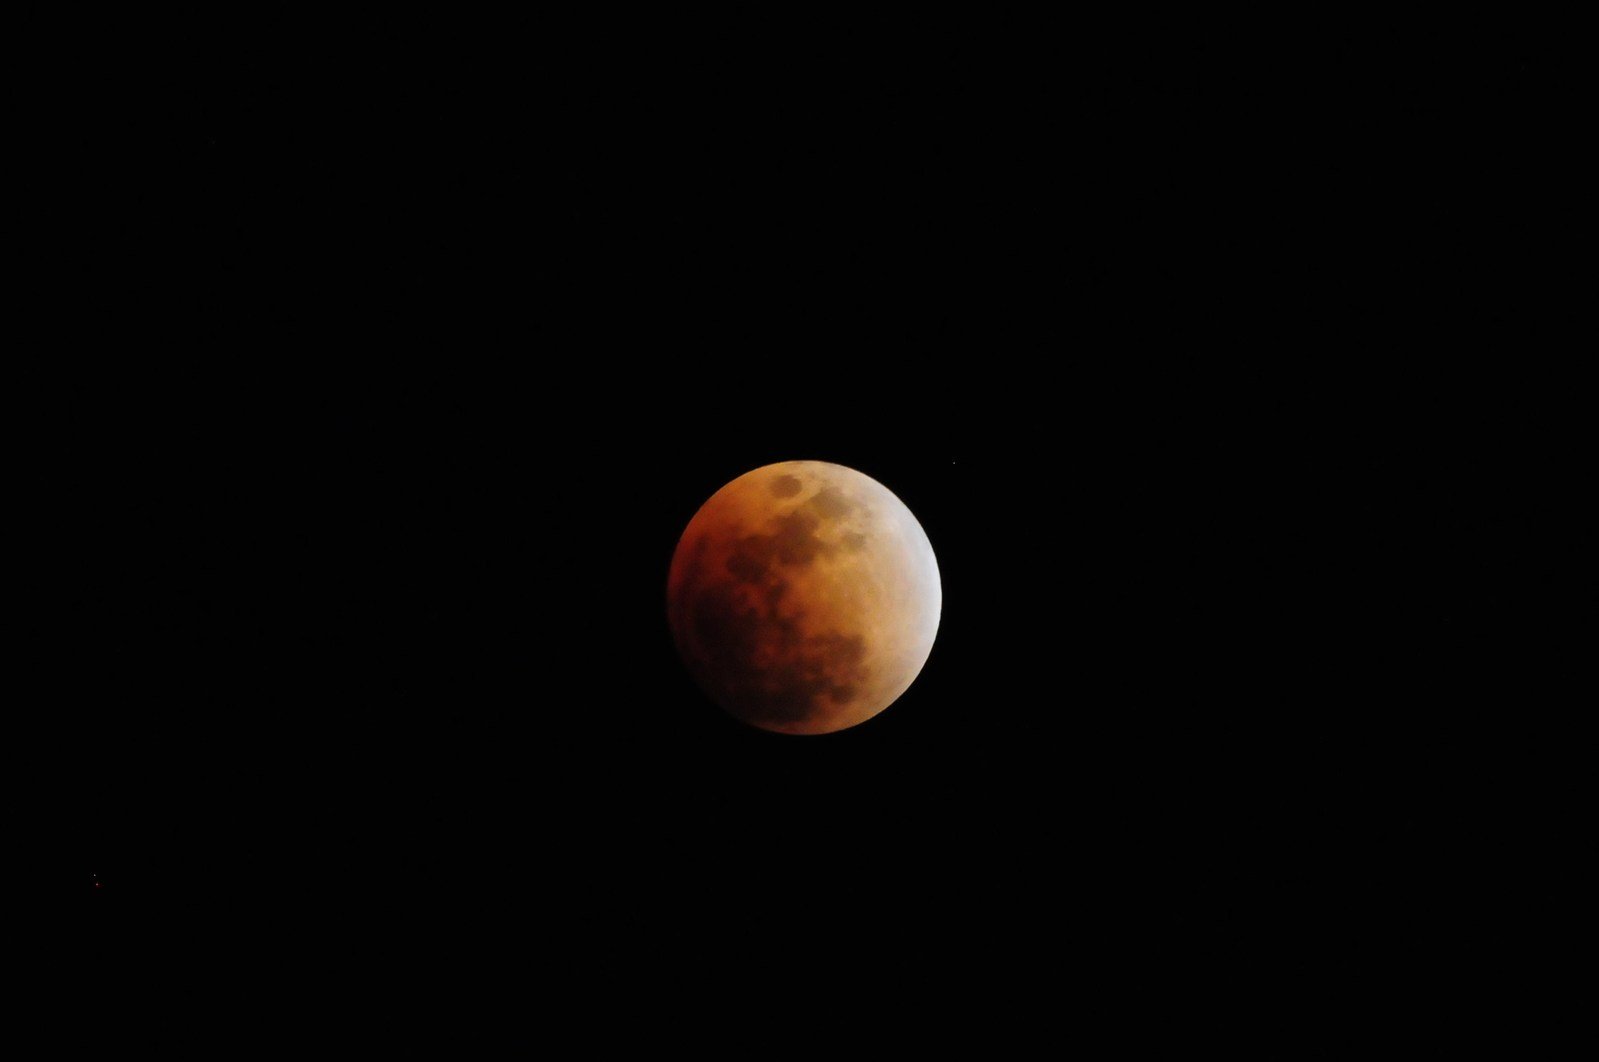 the eclipse of a red full moon with only visible